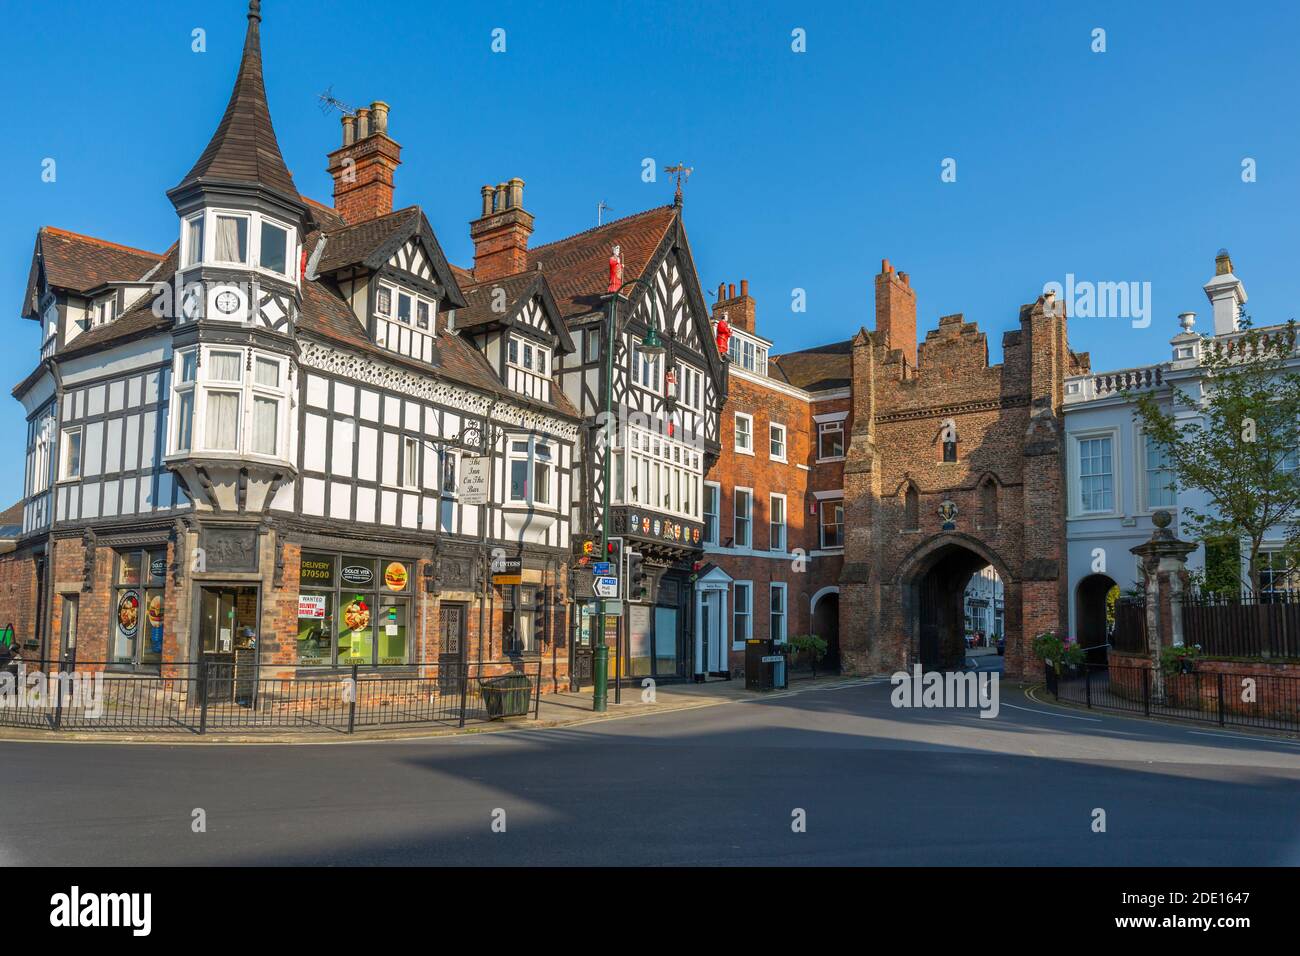 View of North Bar, the city gate and ornate architecture, Beverley, North Humberside, East Yorkshire, England, United Kingdom, Europe Stock Photo